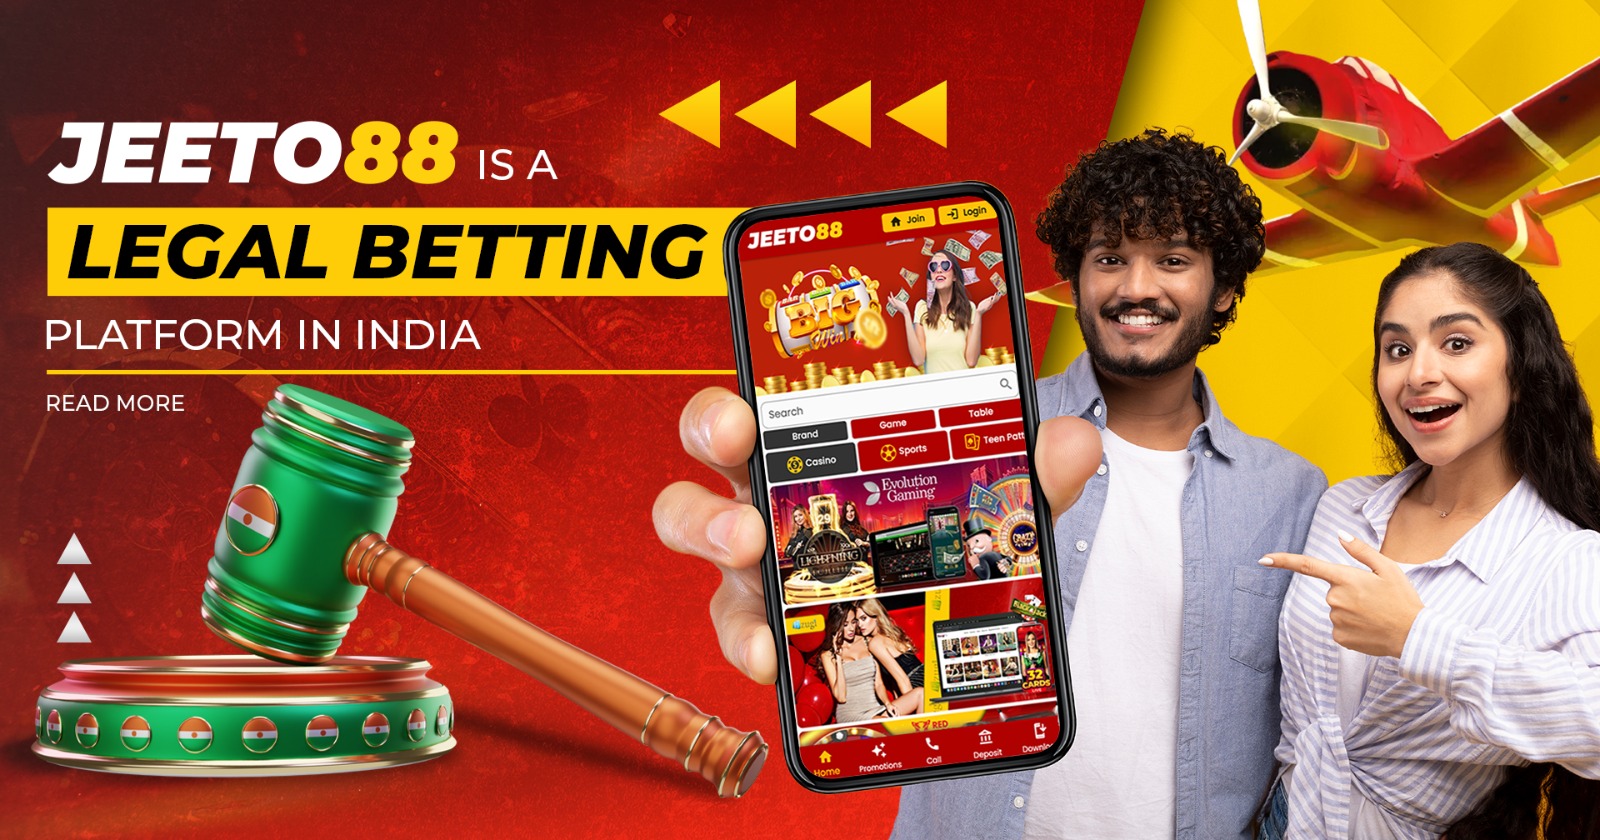 Jeeto88 is Legal Betting Platform in India